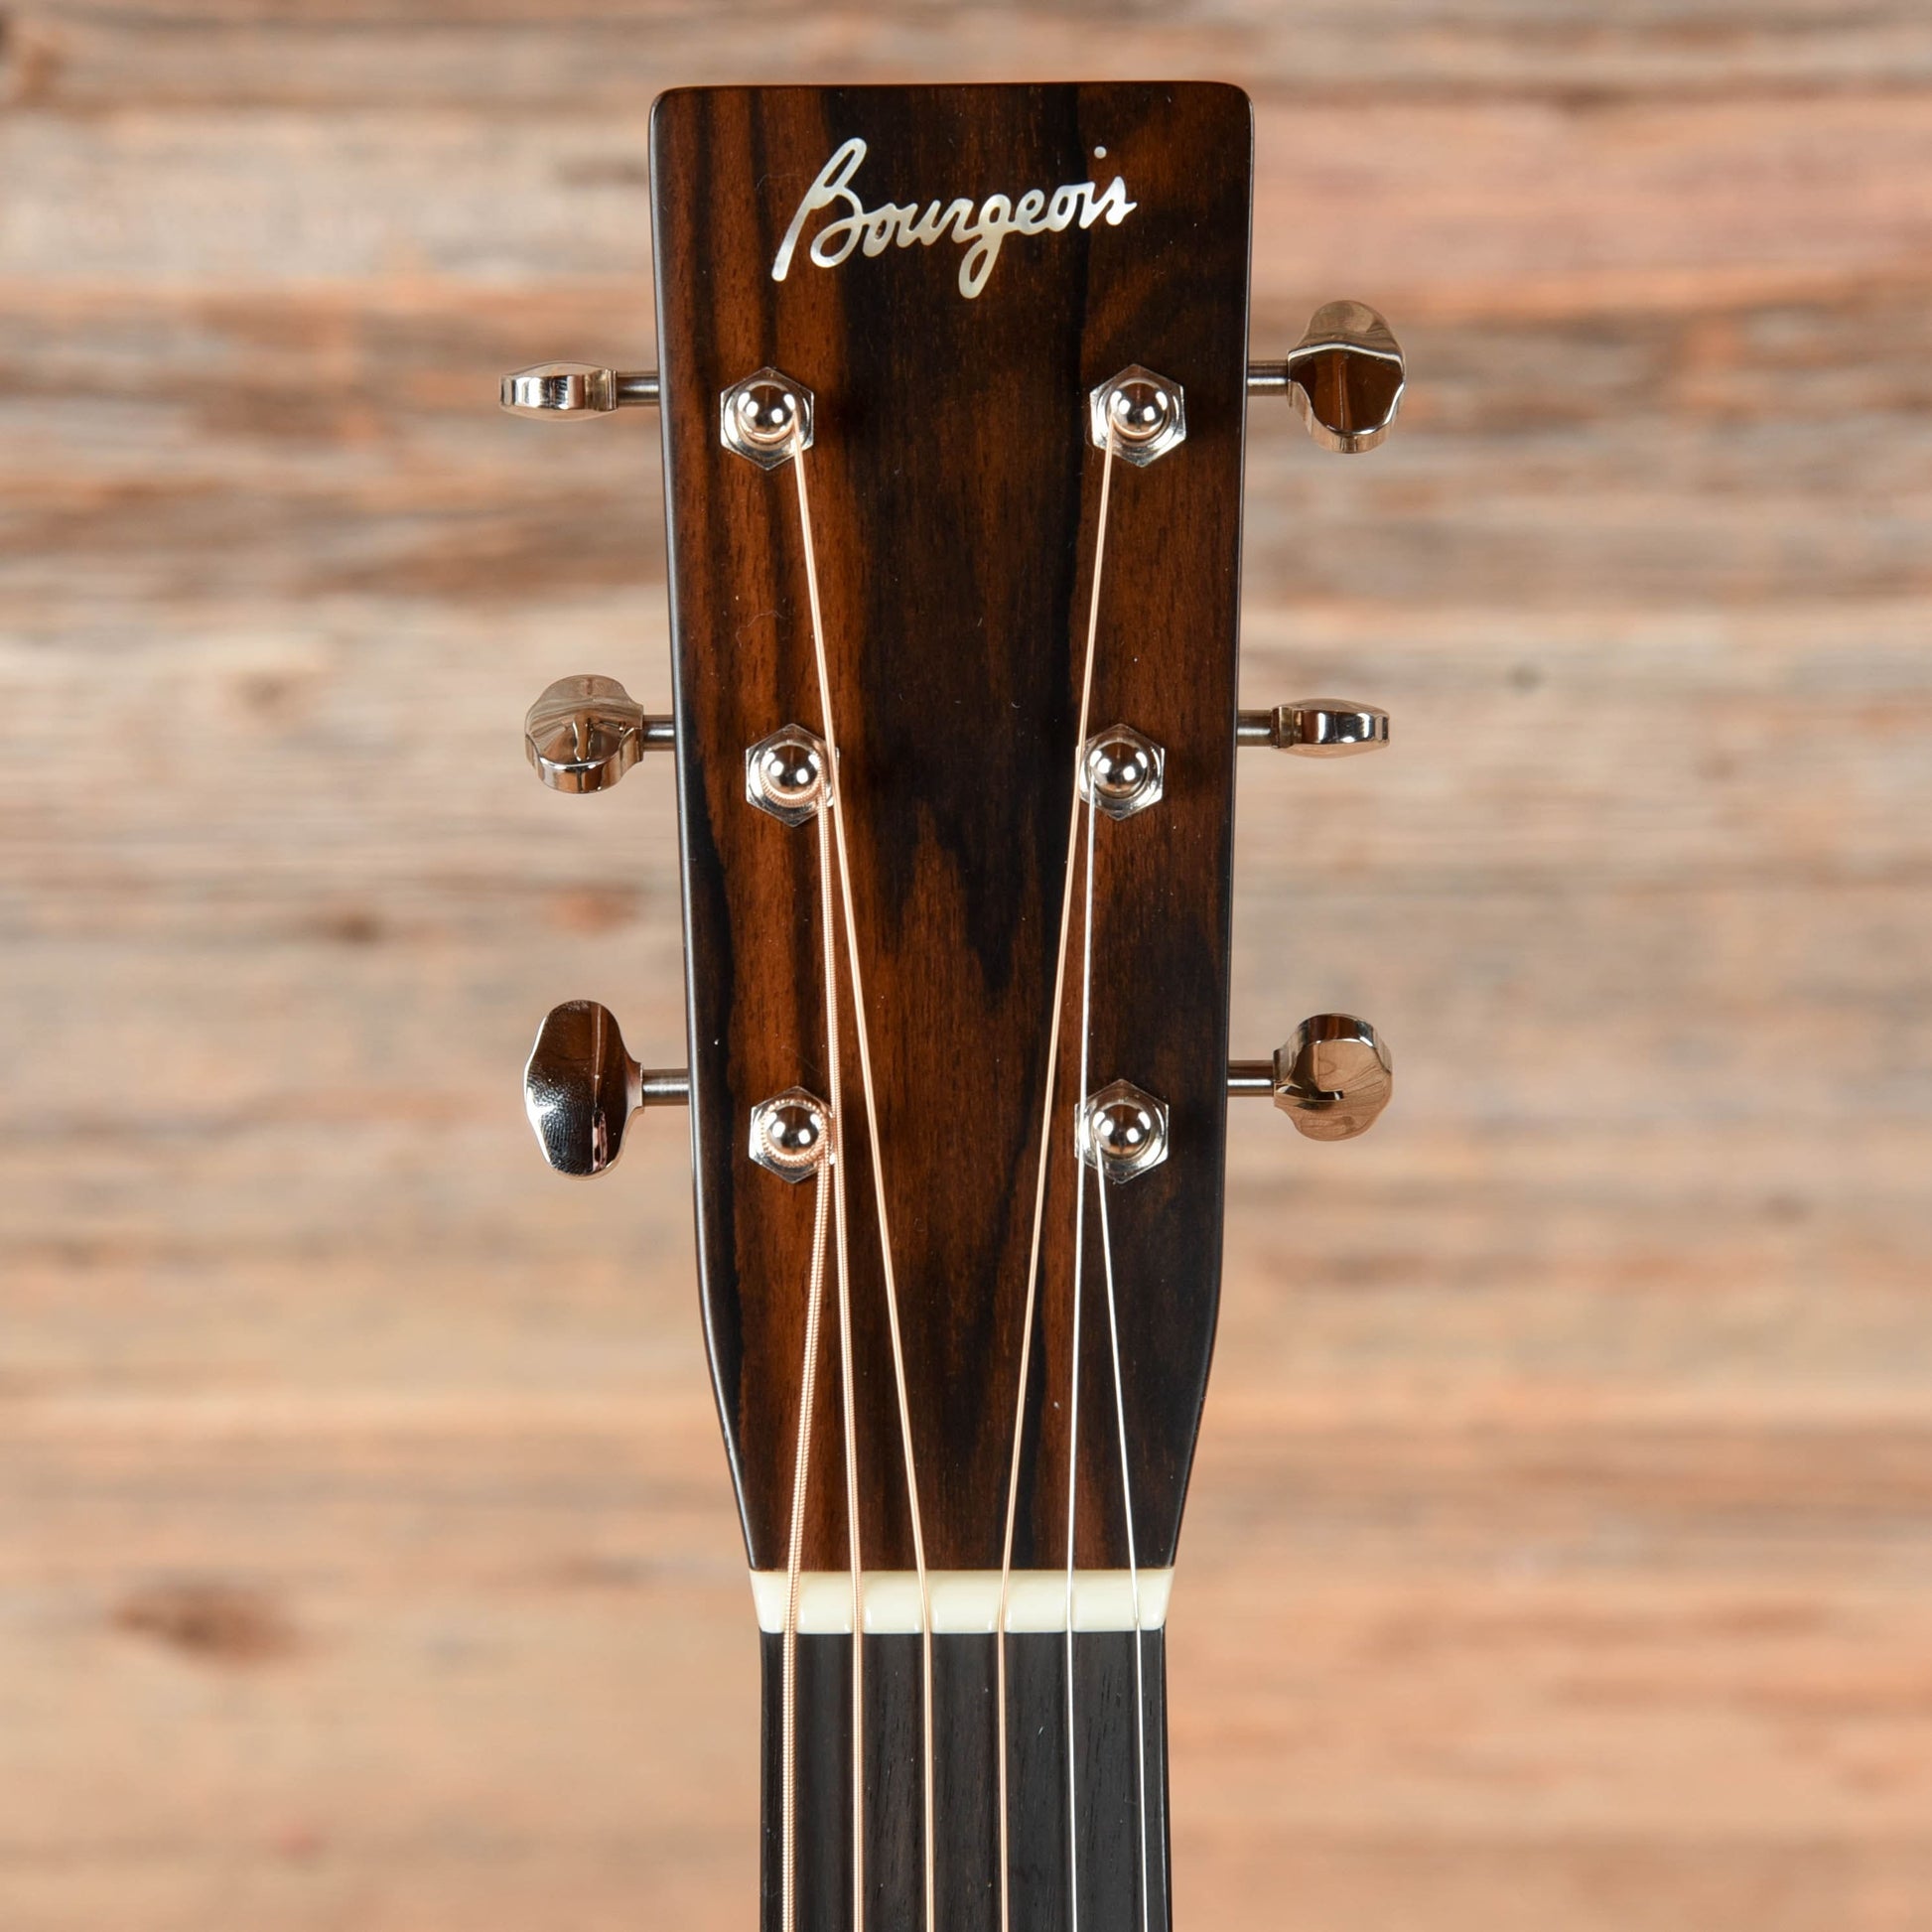 Bourgeois OM Vintage TS Natural 2022 Acoustic Guitars / OM and Auditorium